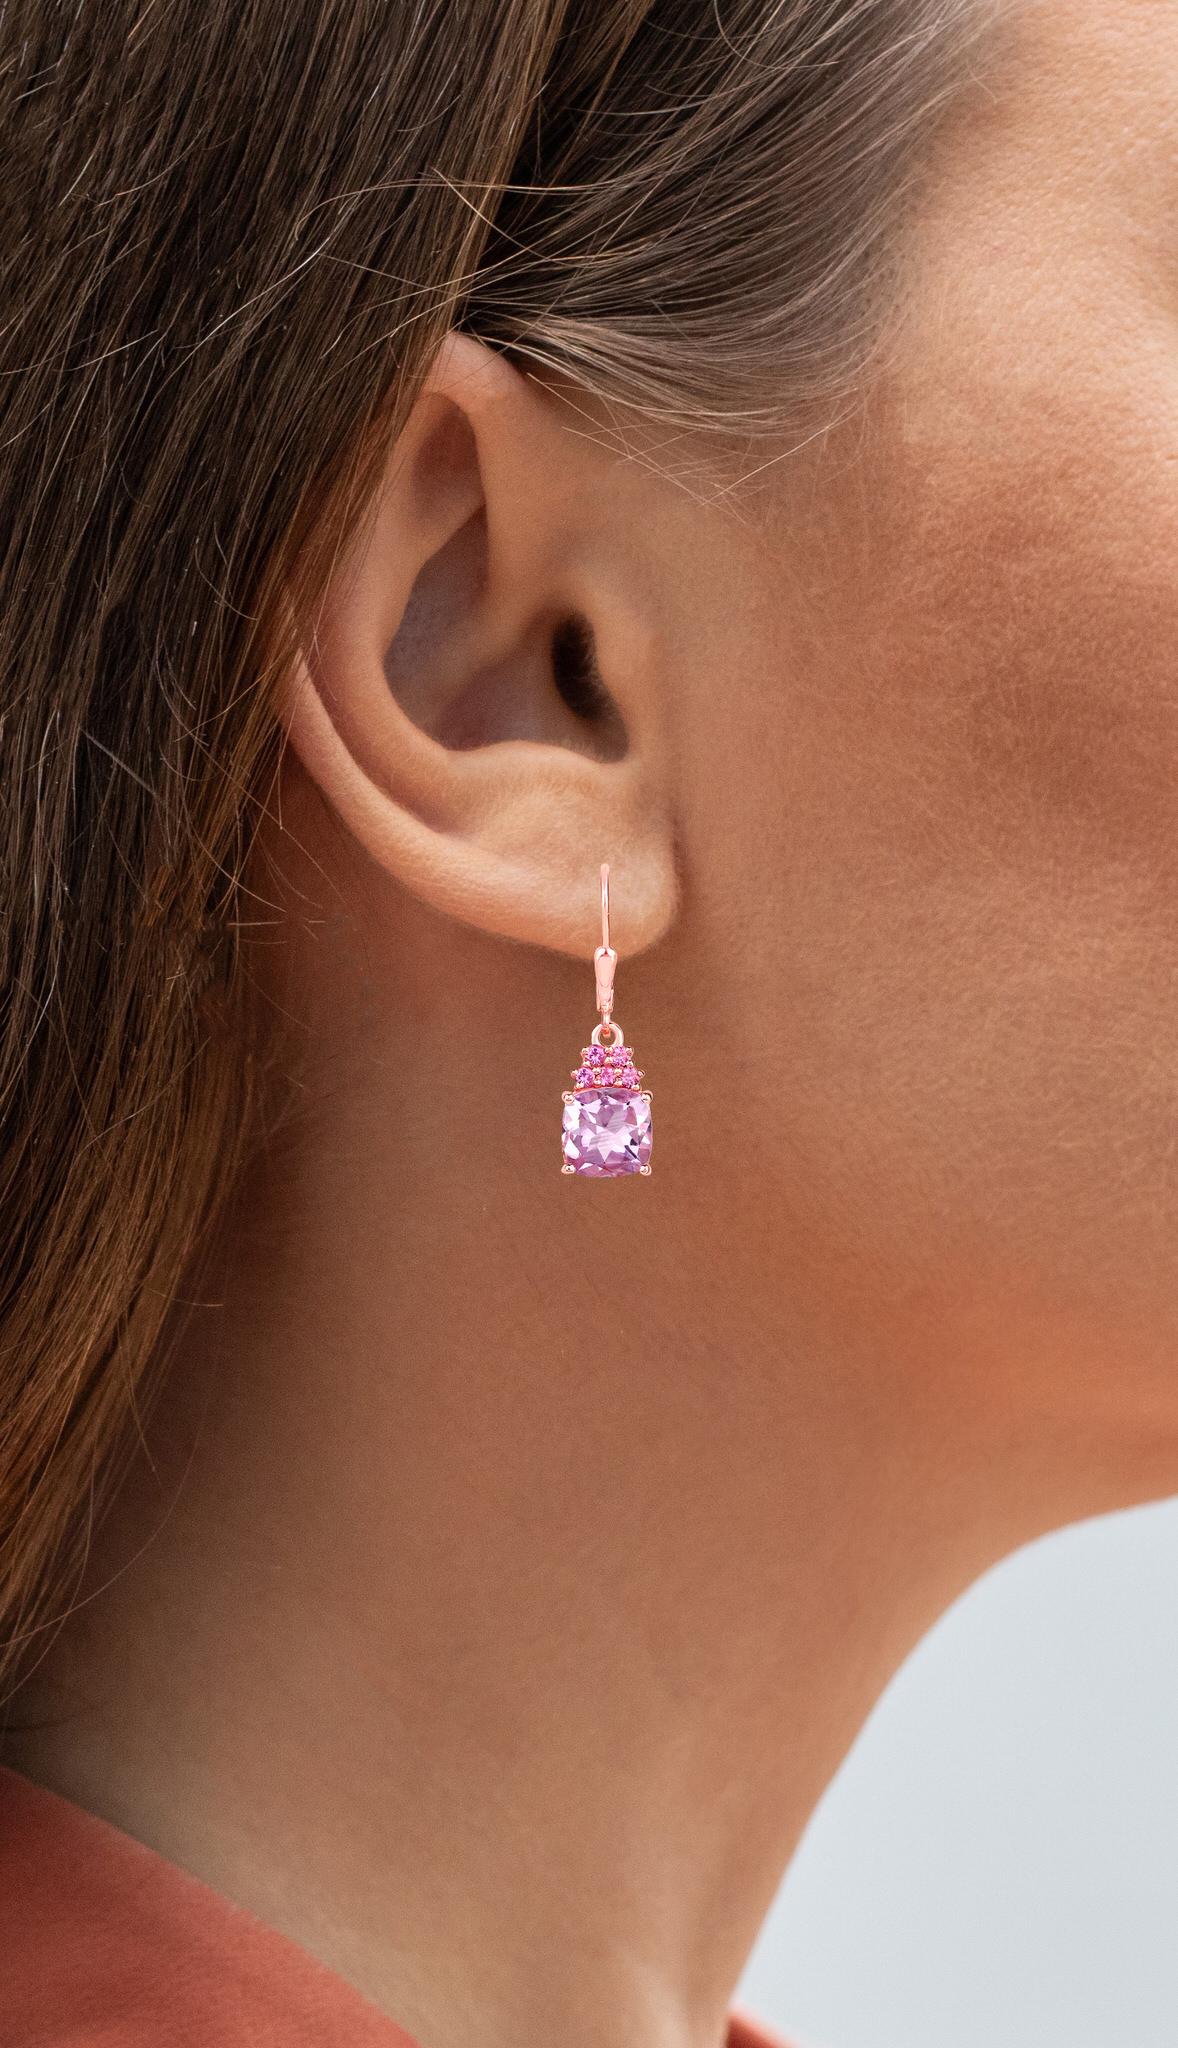 It comes with the Gemological Appraisal by GIA GG/AJP
All Gemstones are Natural
2 Pink Amethysts = 4.40 Carats
10 Rhodolite Garnets = 0.50 Carats
Metal: 18K Rose Gold Plated Sterling Silver
Dimensions: 28 x 8 mm